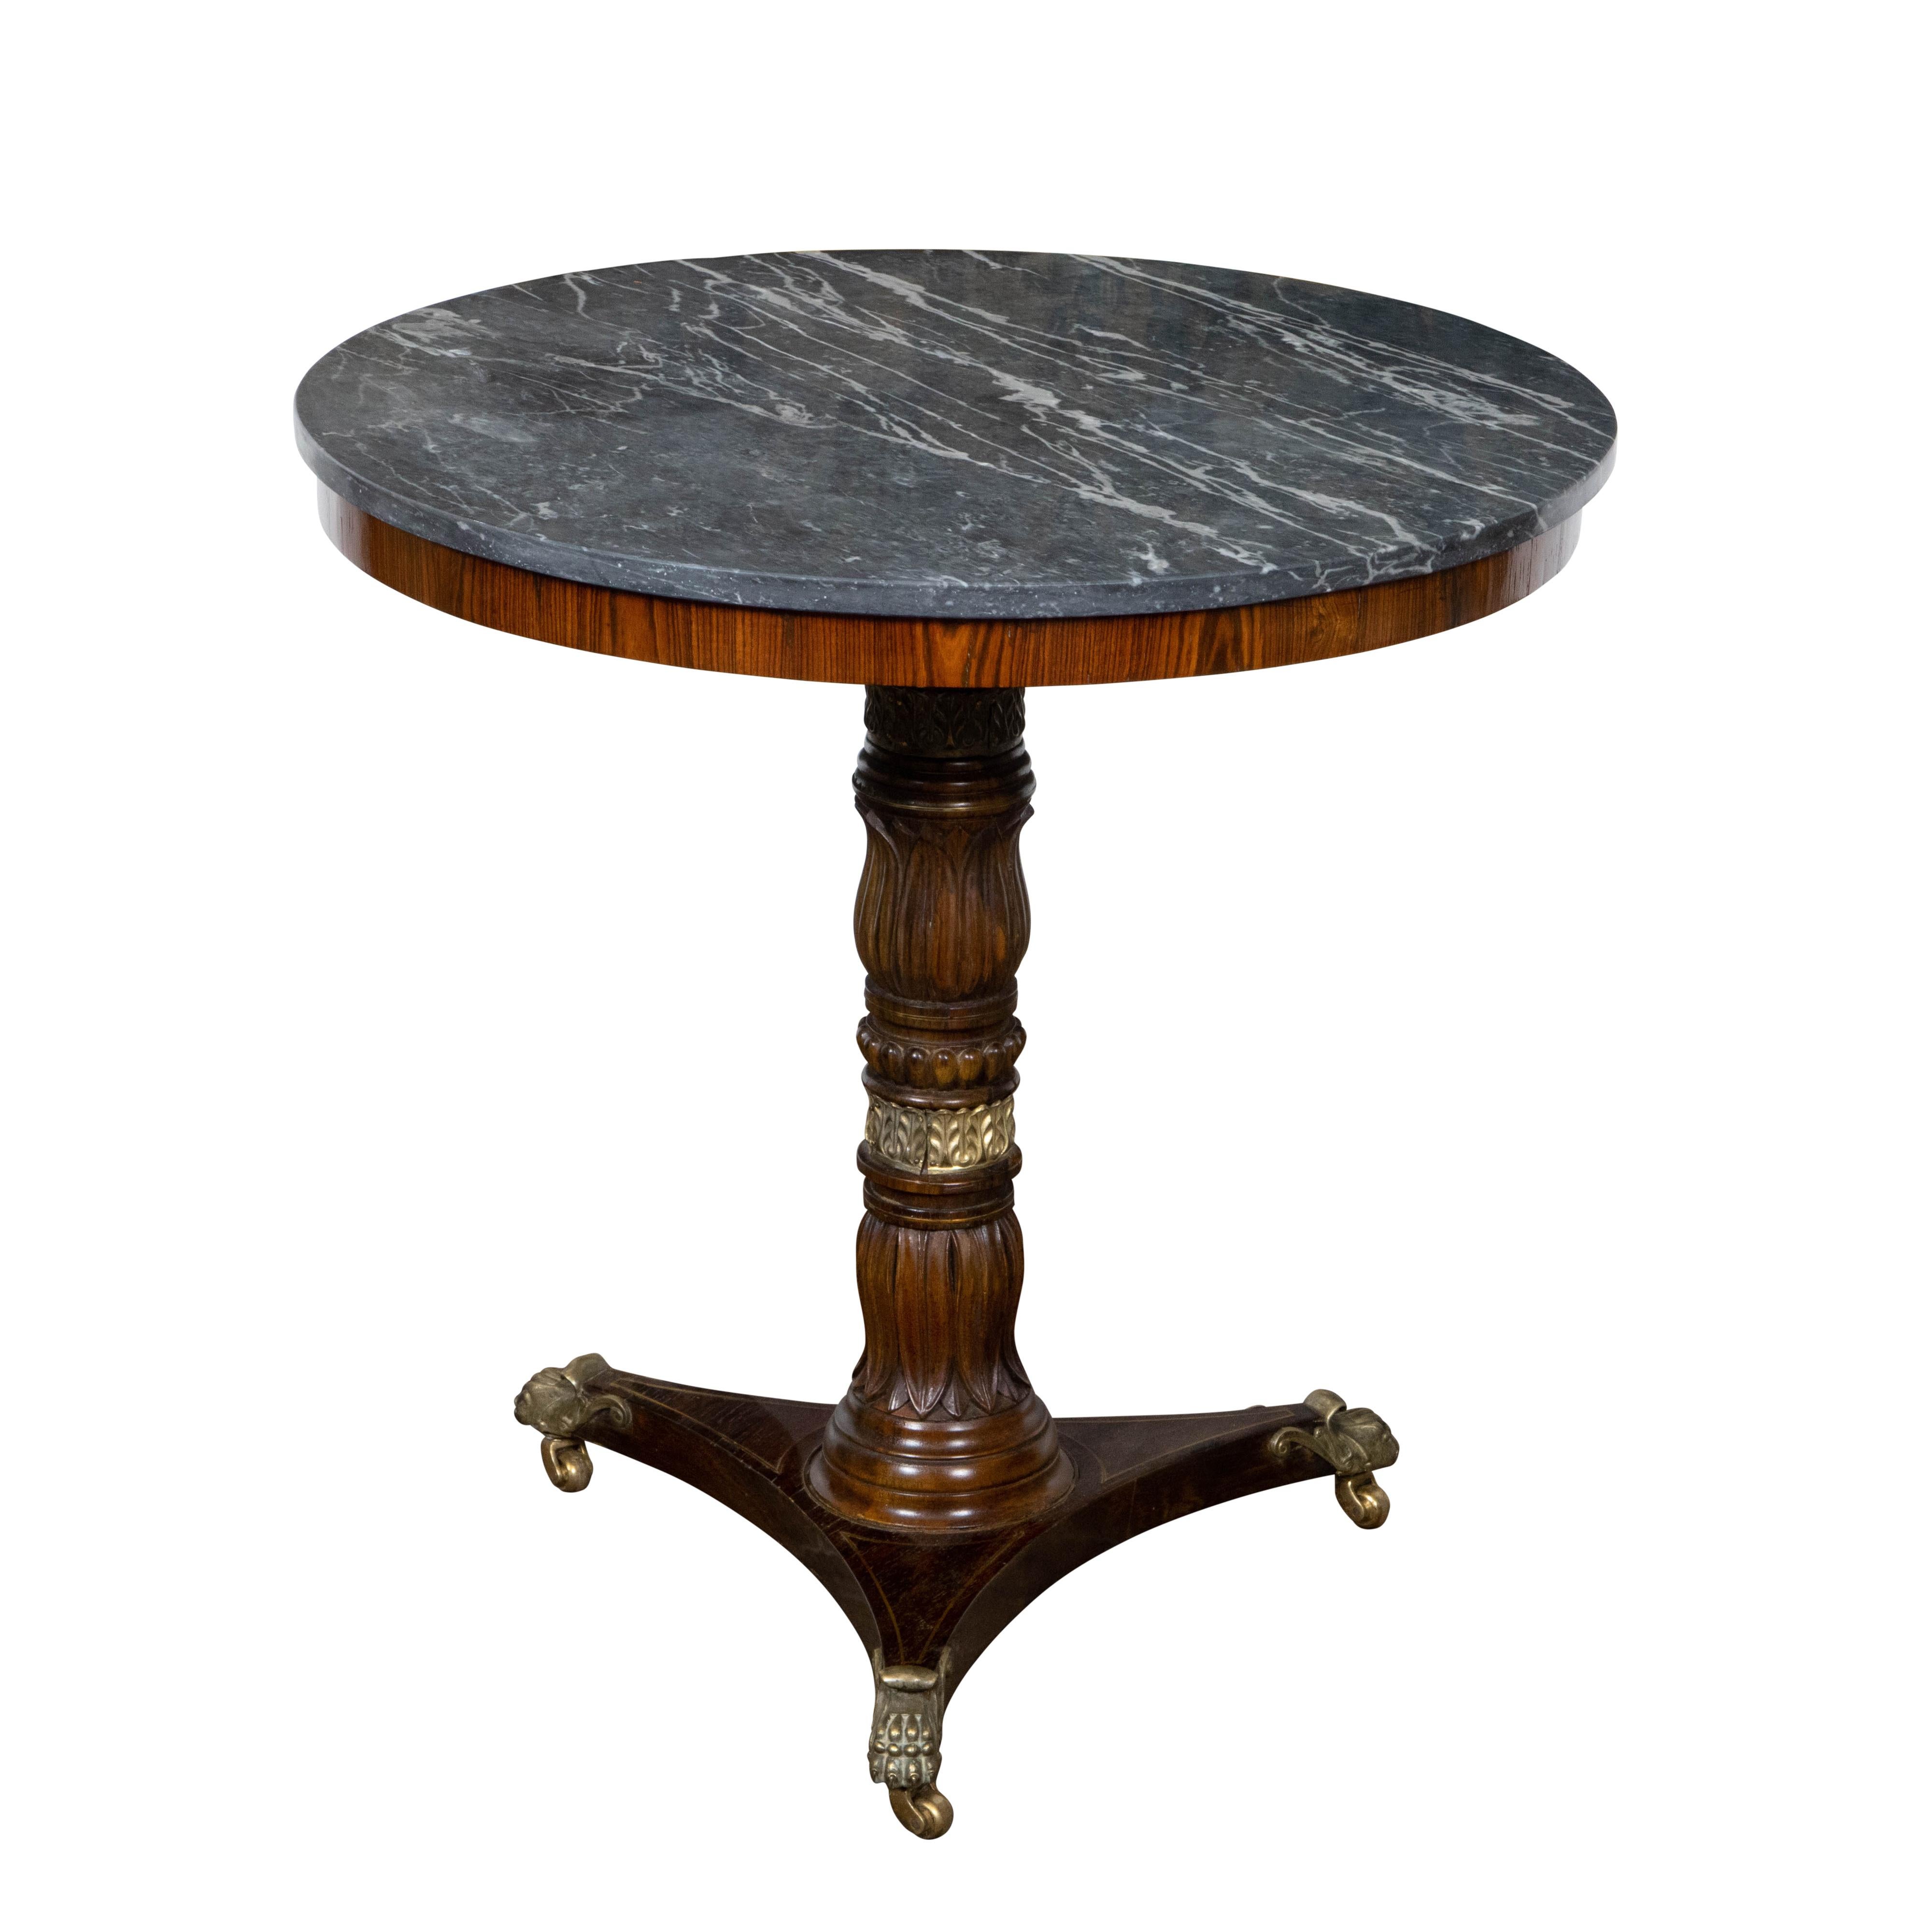 English Regency Period 19th Century Mahogany Side Table with Grey Marble Top In Good Condition For Sale In Atlanta, GA